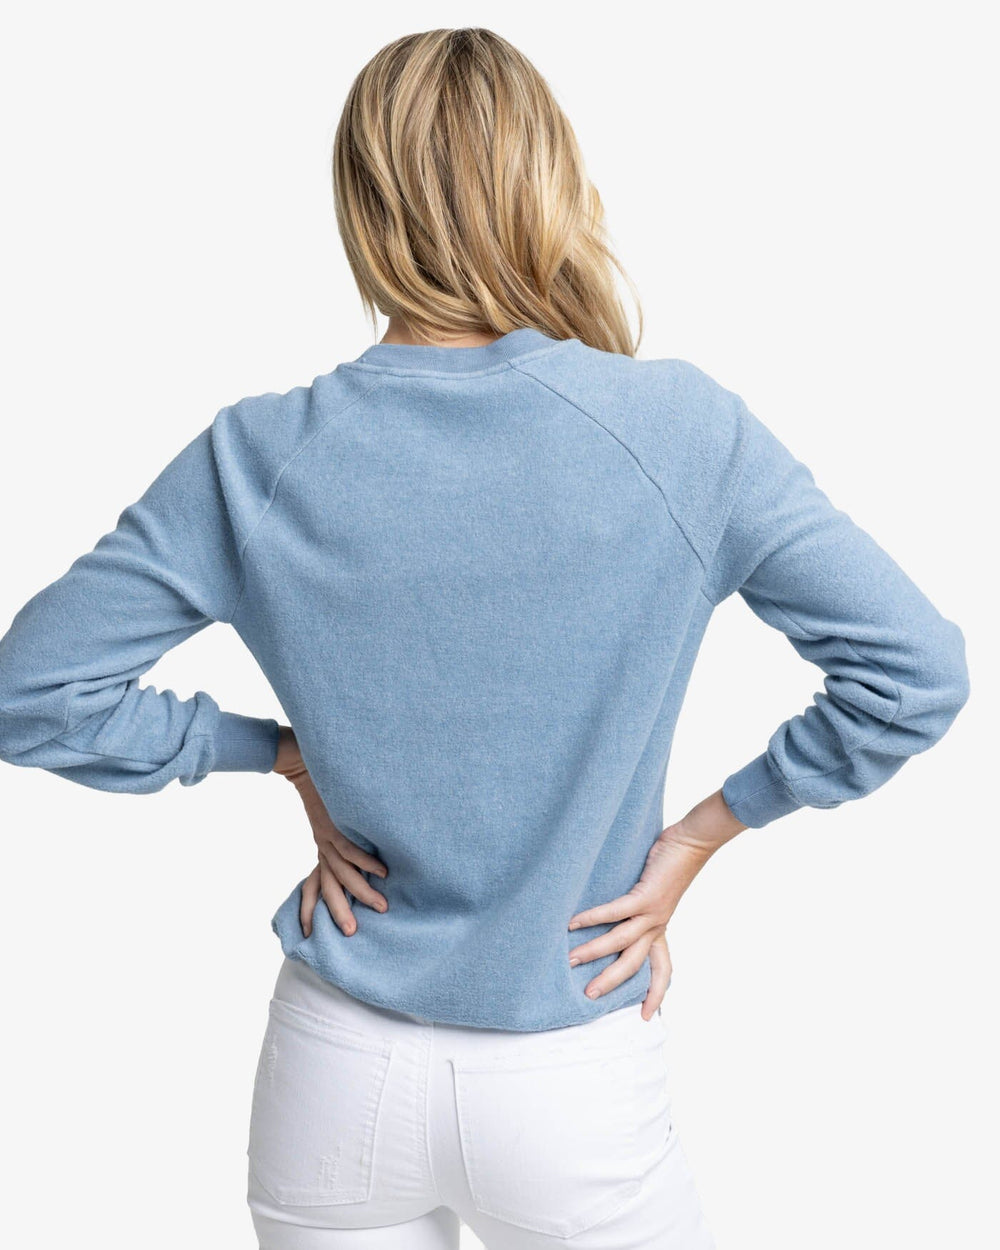 The back view of the Southern Tide Seaside Retreat Heather Sweatshirt by Southern Tide - Heather Mountain Spring Blue